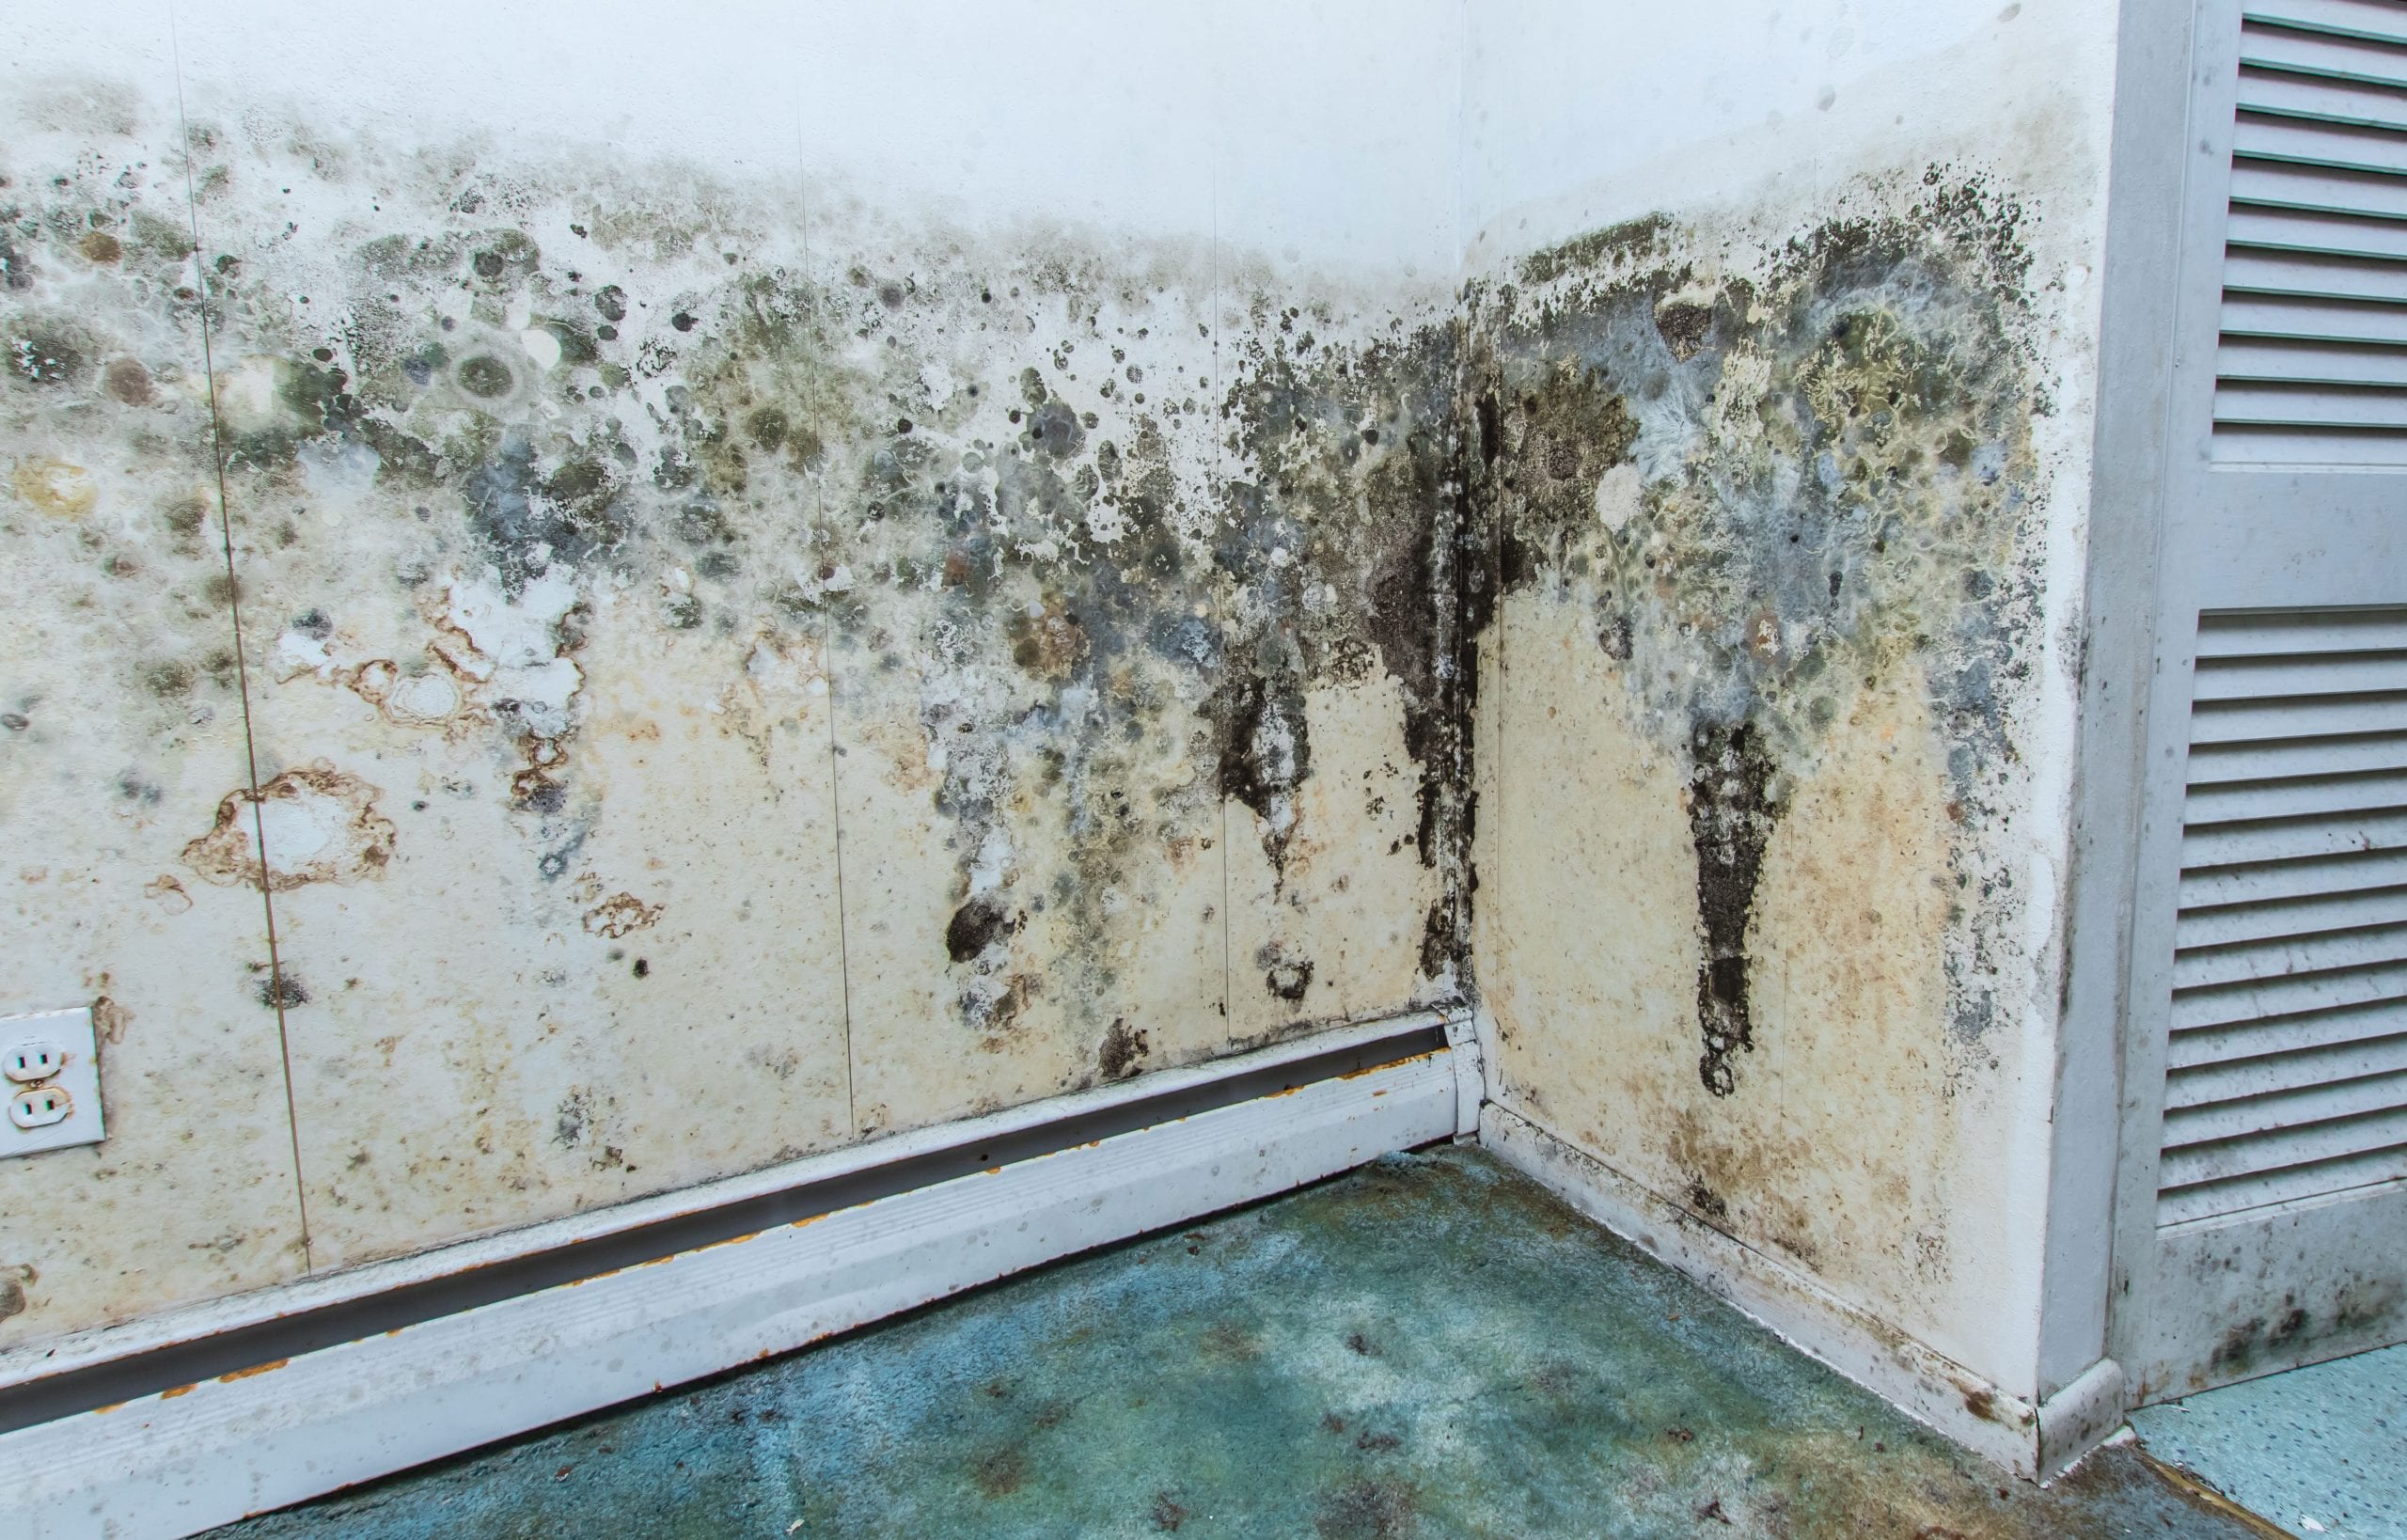 Mold Damager Odor Control Services in Green Bay